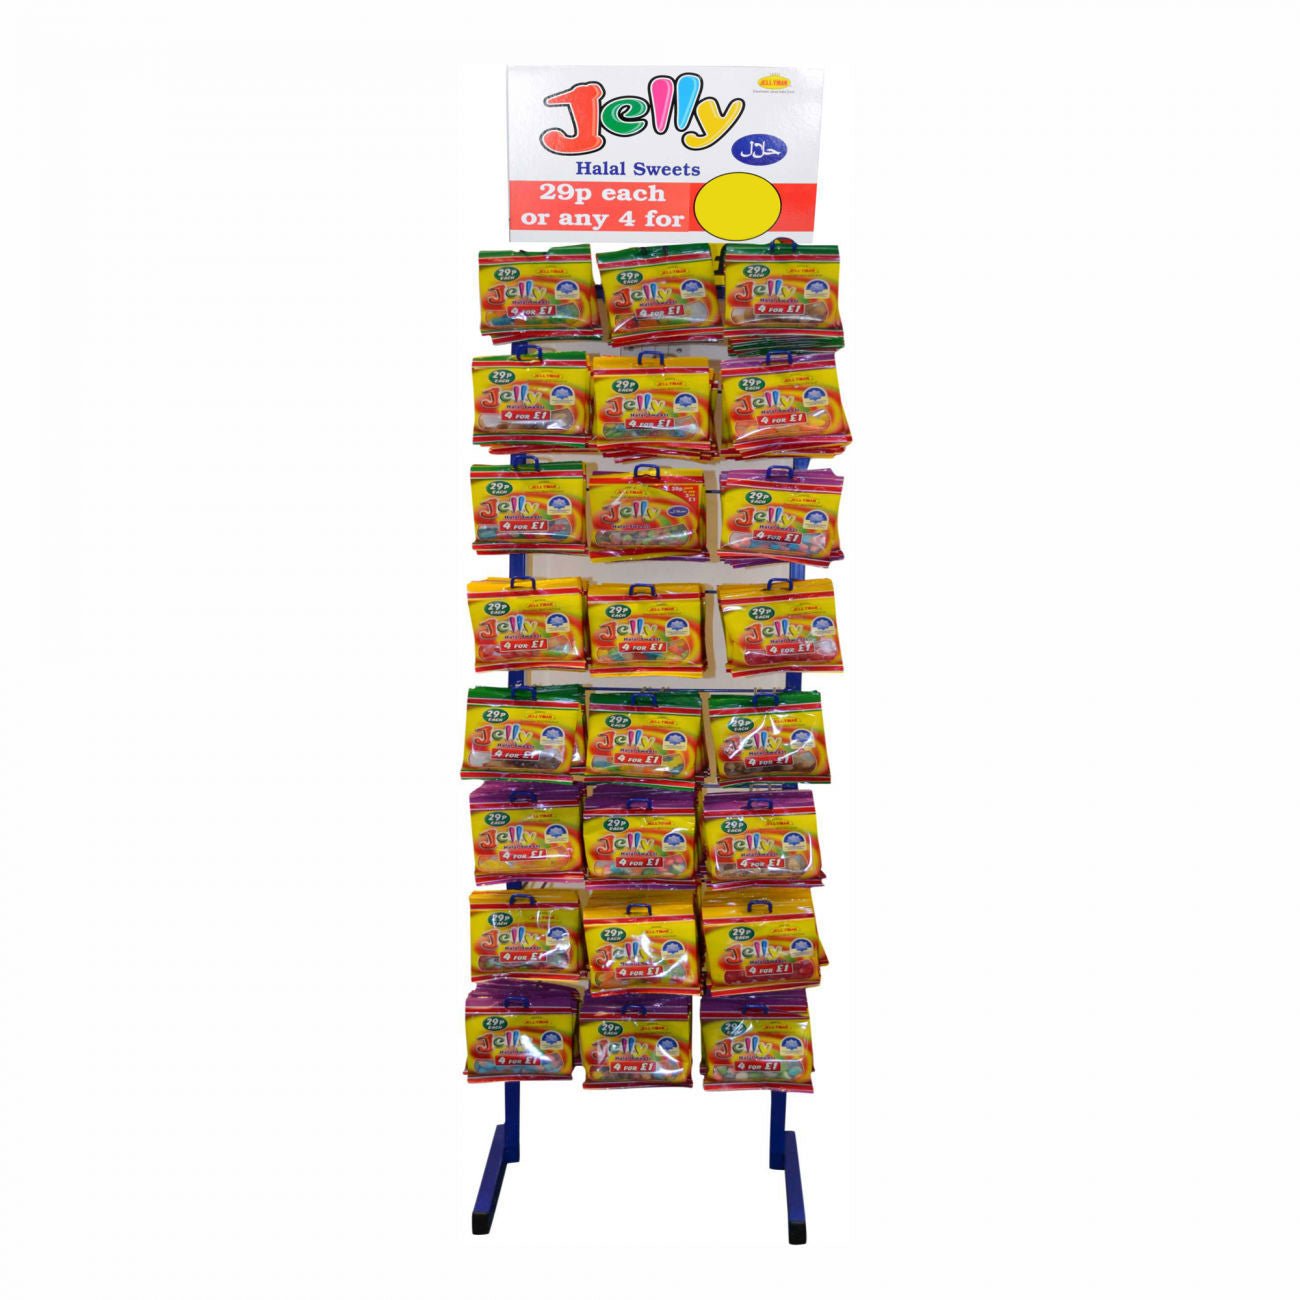 Jelly Halal Sweets 4 For 1 (35 gr X 96 pcs) - Aytac Foods